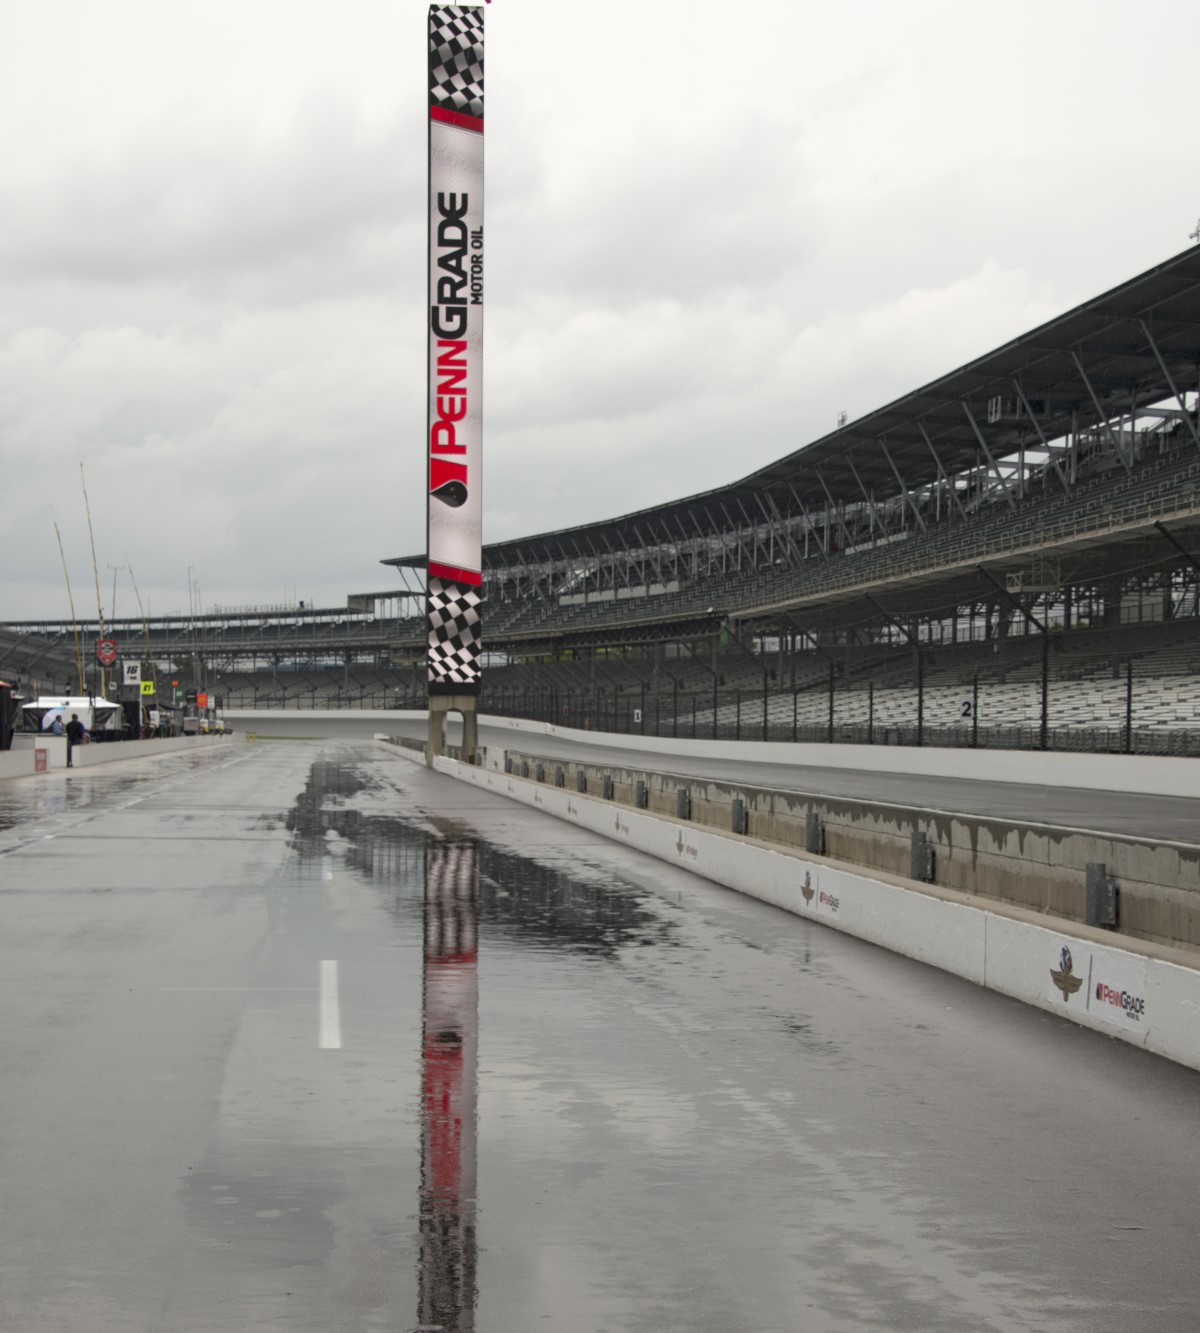 Tuesday was a total washout at the speedway